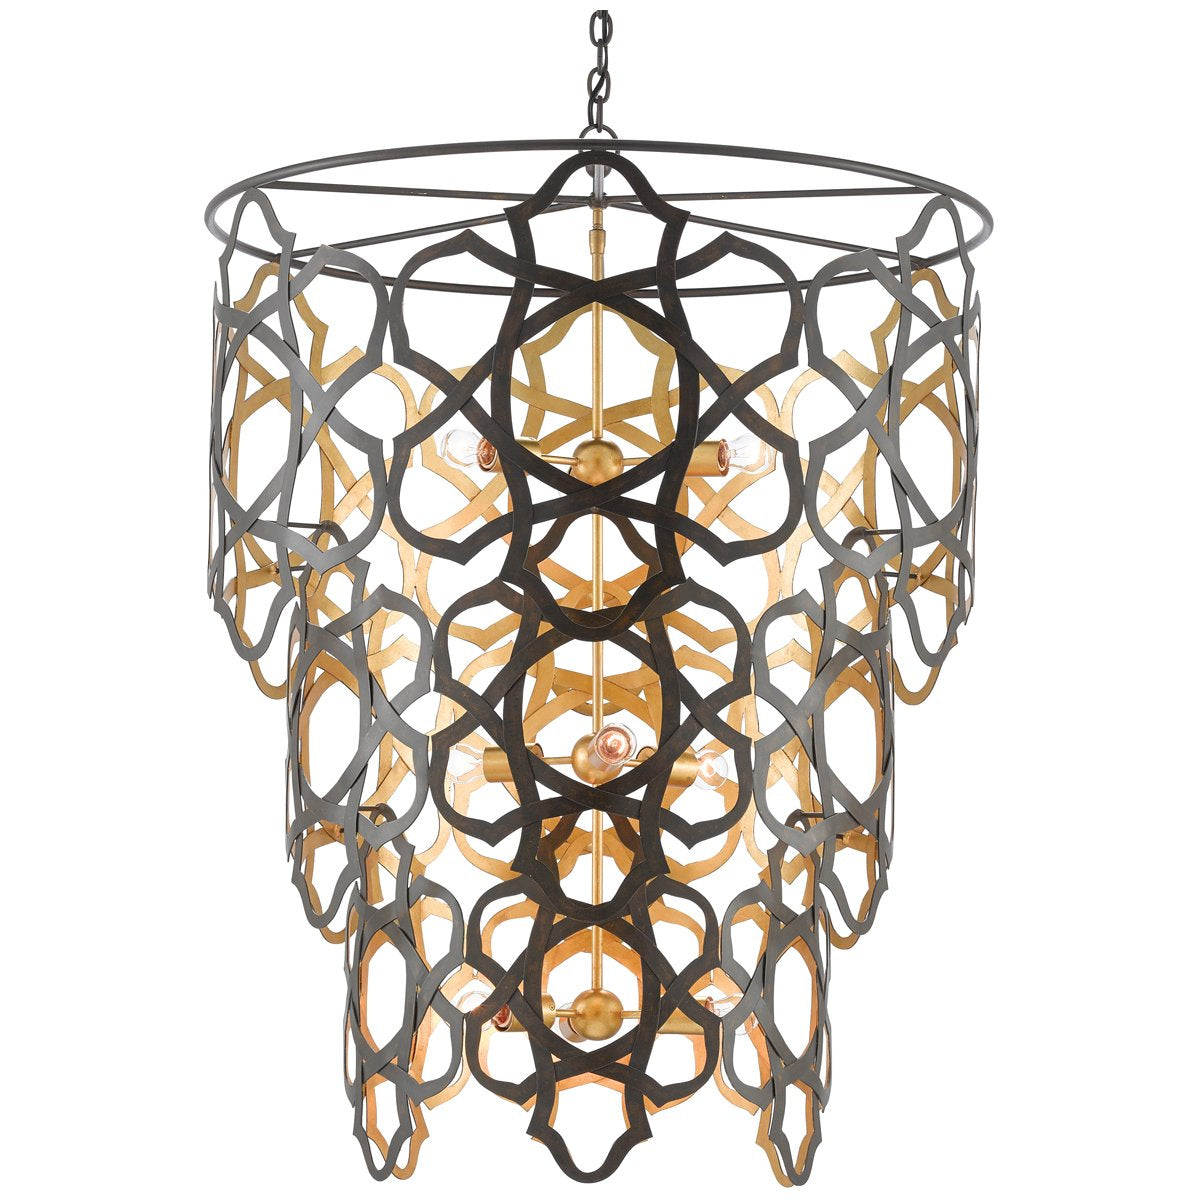 Currey and Company Mauresque Chandelier